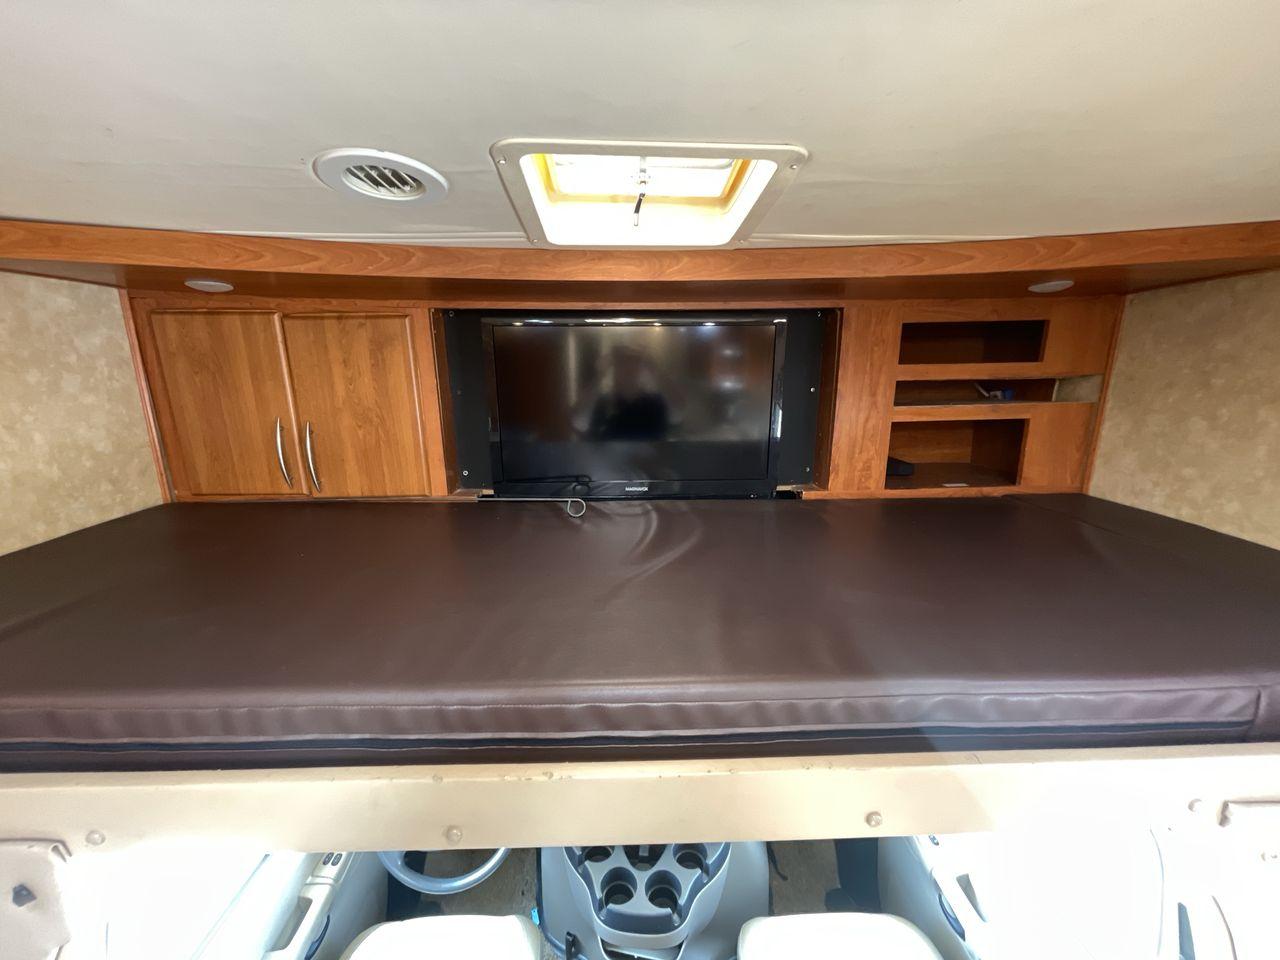 2008 TAN COACHMEN LEPRECHAUN 320DS E-450 (1FDXE45S08D) with an 6.8L V10 SOHC 20V engine, Length: 31.5 ft. | Dry Weight: 12,555 lbs. | Gross Weight: 14,500 lbs. | Slides: 2 transmission, located at 4319 N Main St, Cleburne, TX, 76033, (817) 678-5133, 32.385960, -97.391212 - Here are some unique features and characteristics of the 2008 Coachmen Leprechaun 320DS that will make you want to buy this motorhome. (1) The 2008 Coachmen Leprechaun 320DS has two slide-outs, which expand the living space to create more room for relaxation and entertainment. With these additional - Photo #18